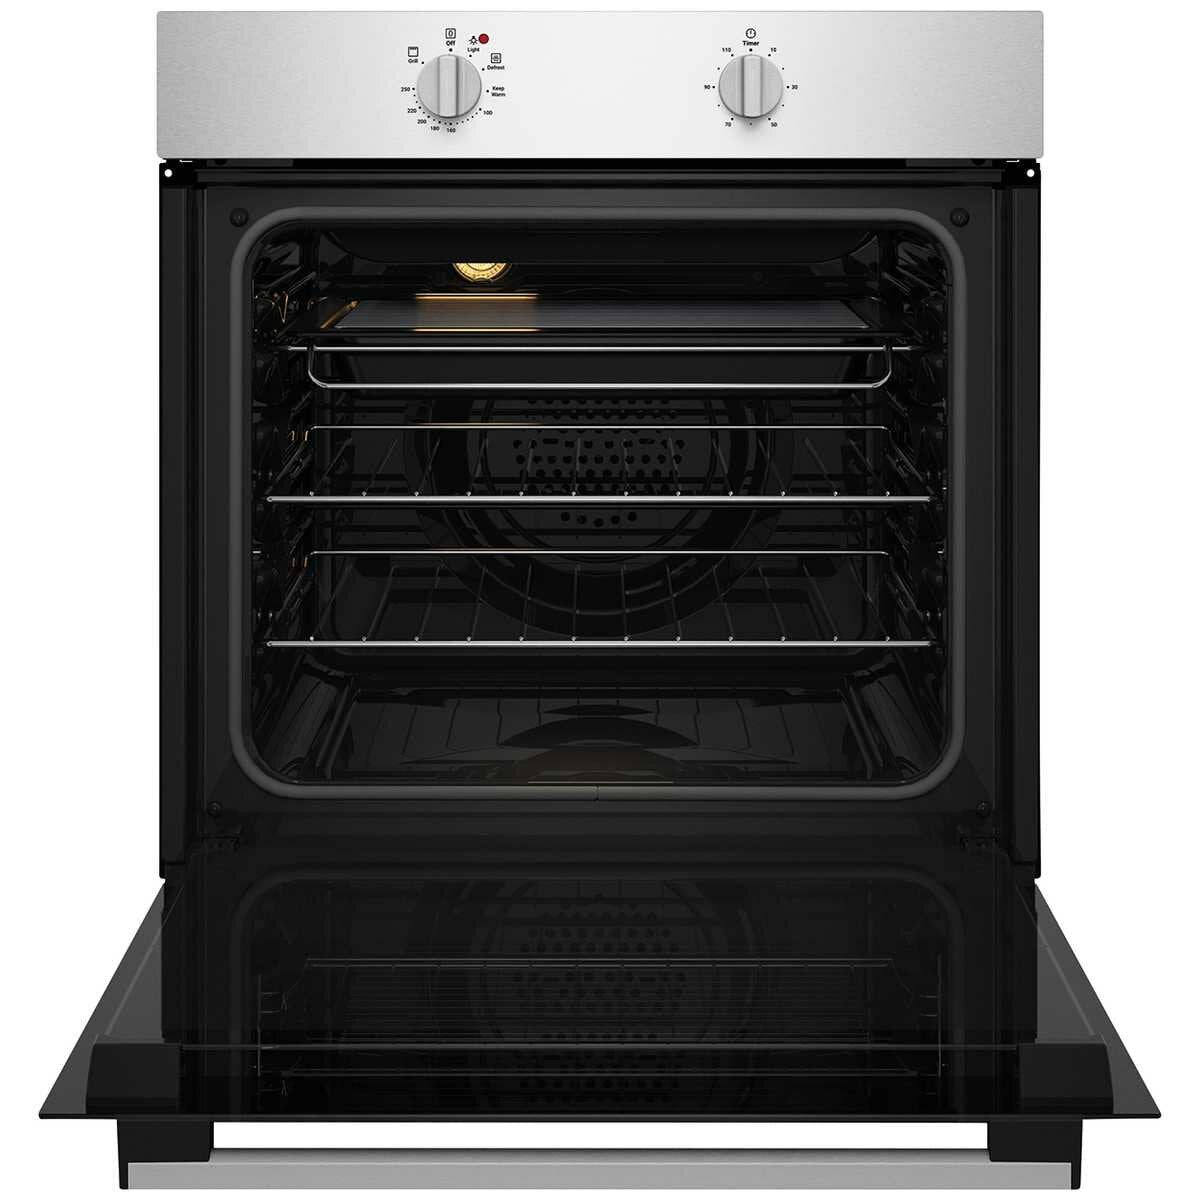 Chef 60cm Electric Built-In Oven - Brisbane Home Appliances